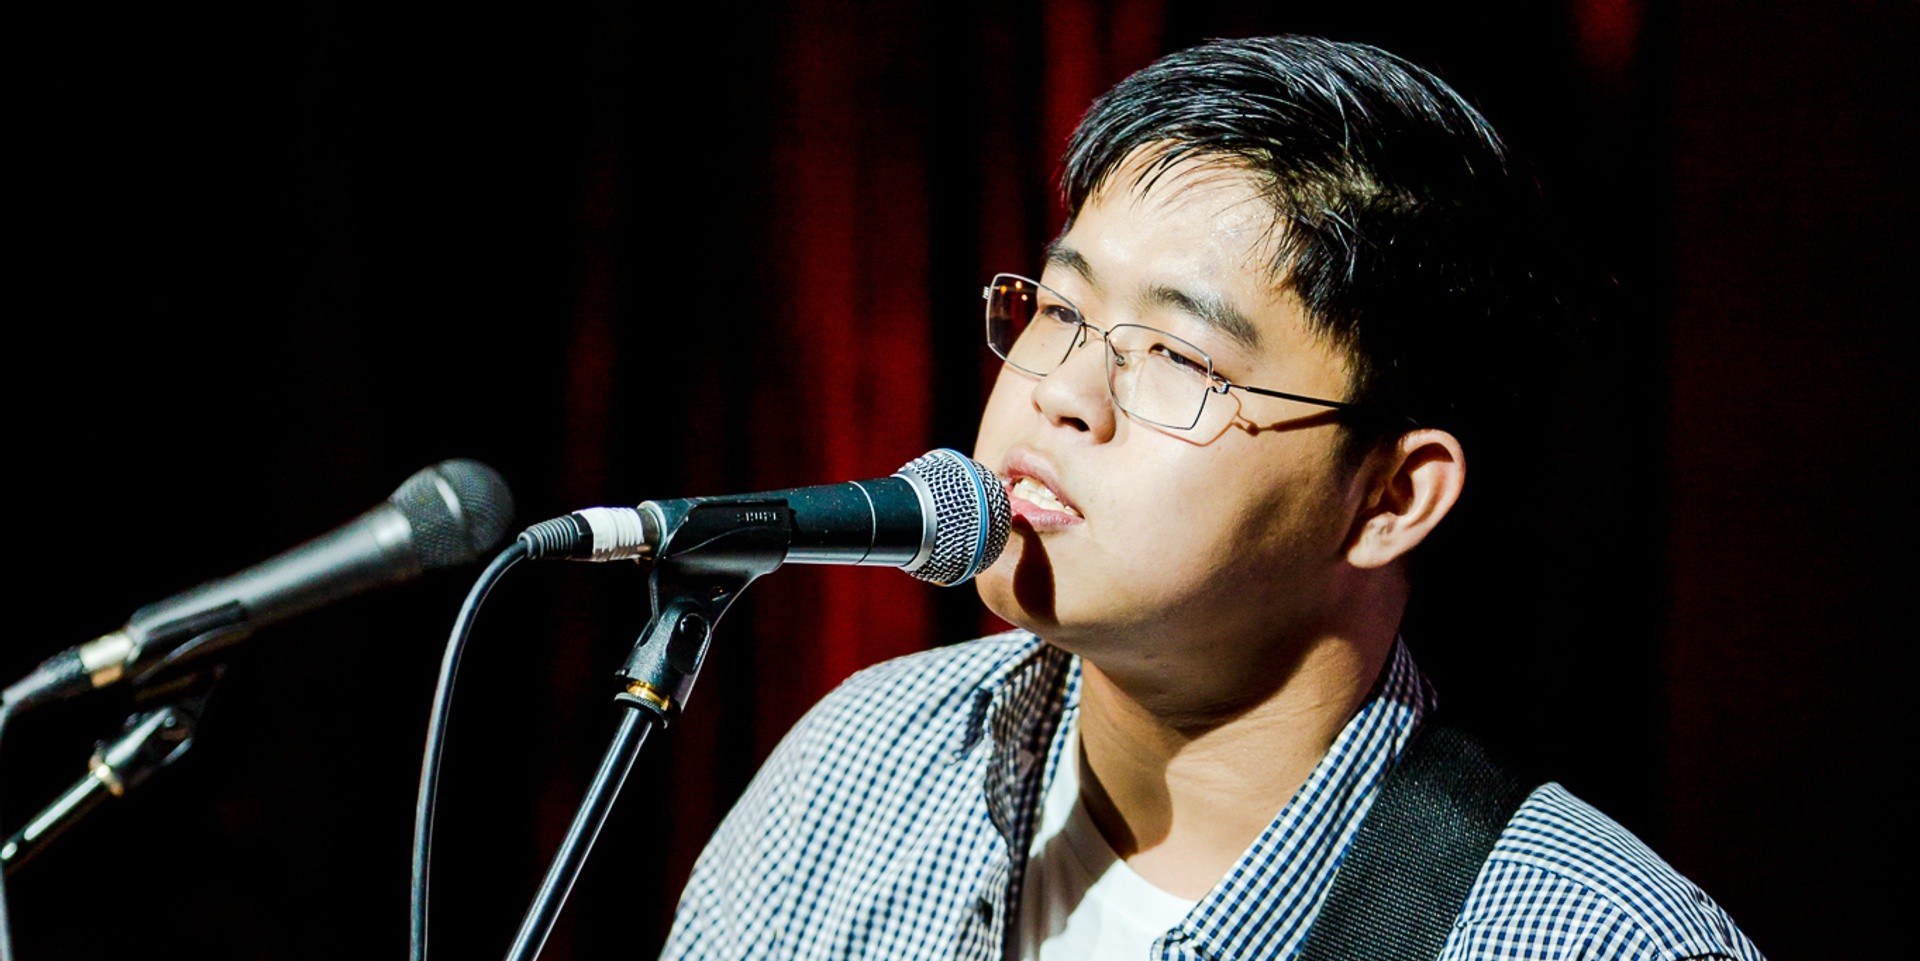 LISTEN: Bryan Chua touches upon mental health in more ways than one with 'Artist'